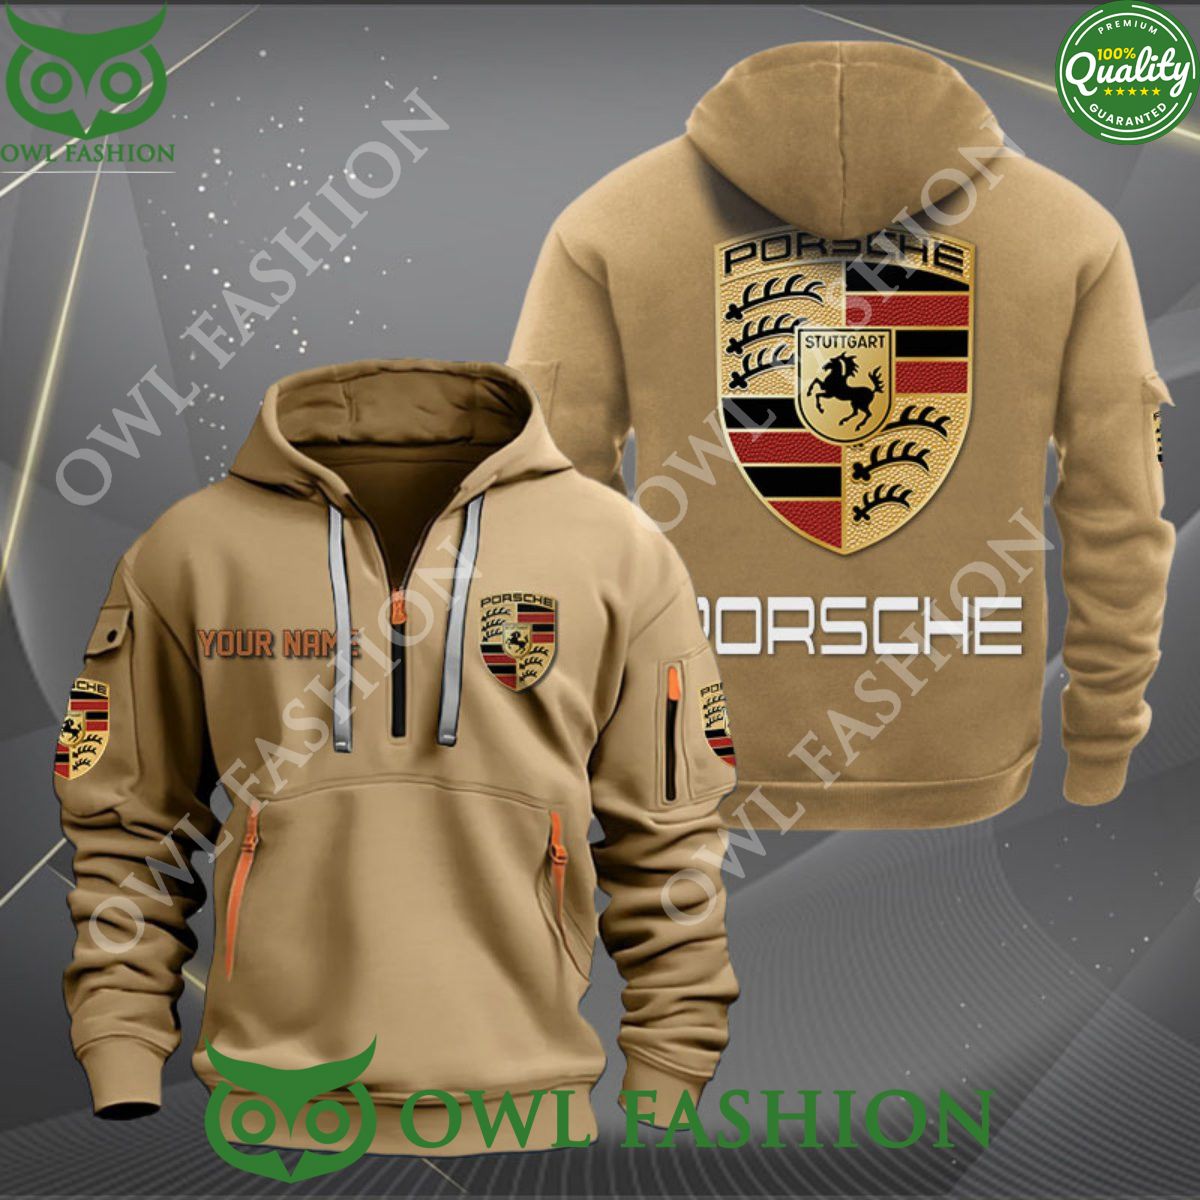 Porsche Car Brand Customized 2D Half Zipper Hoodie This is awesome and unique